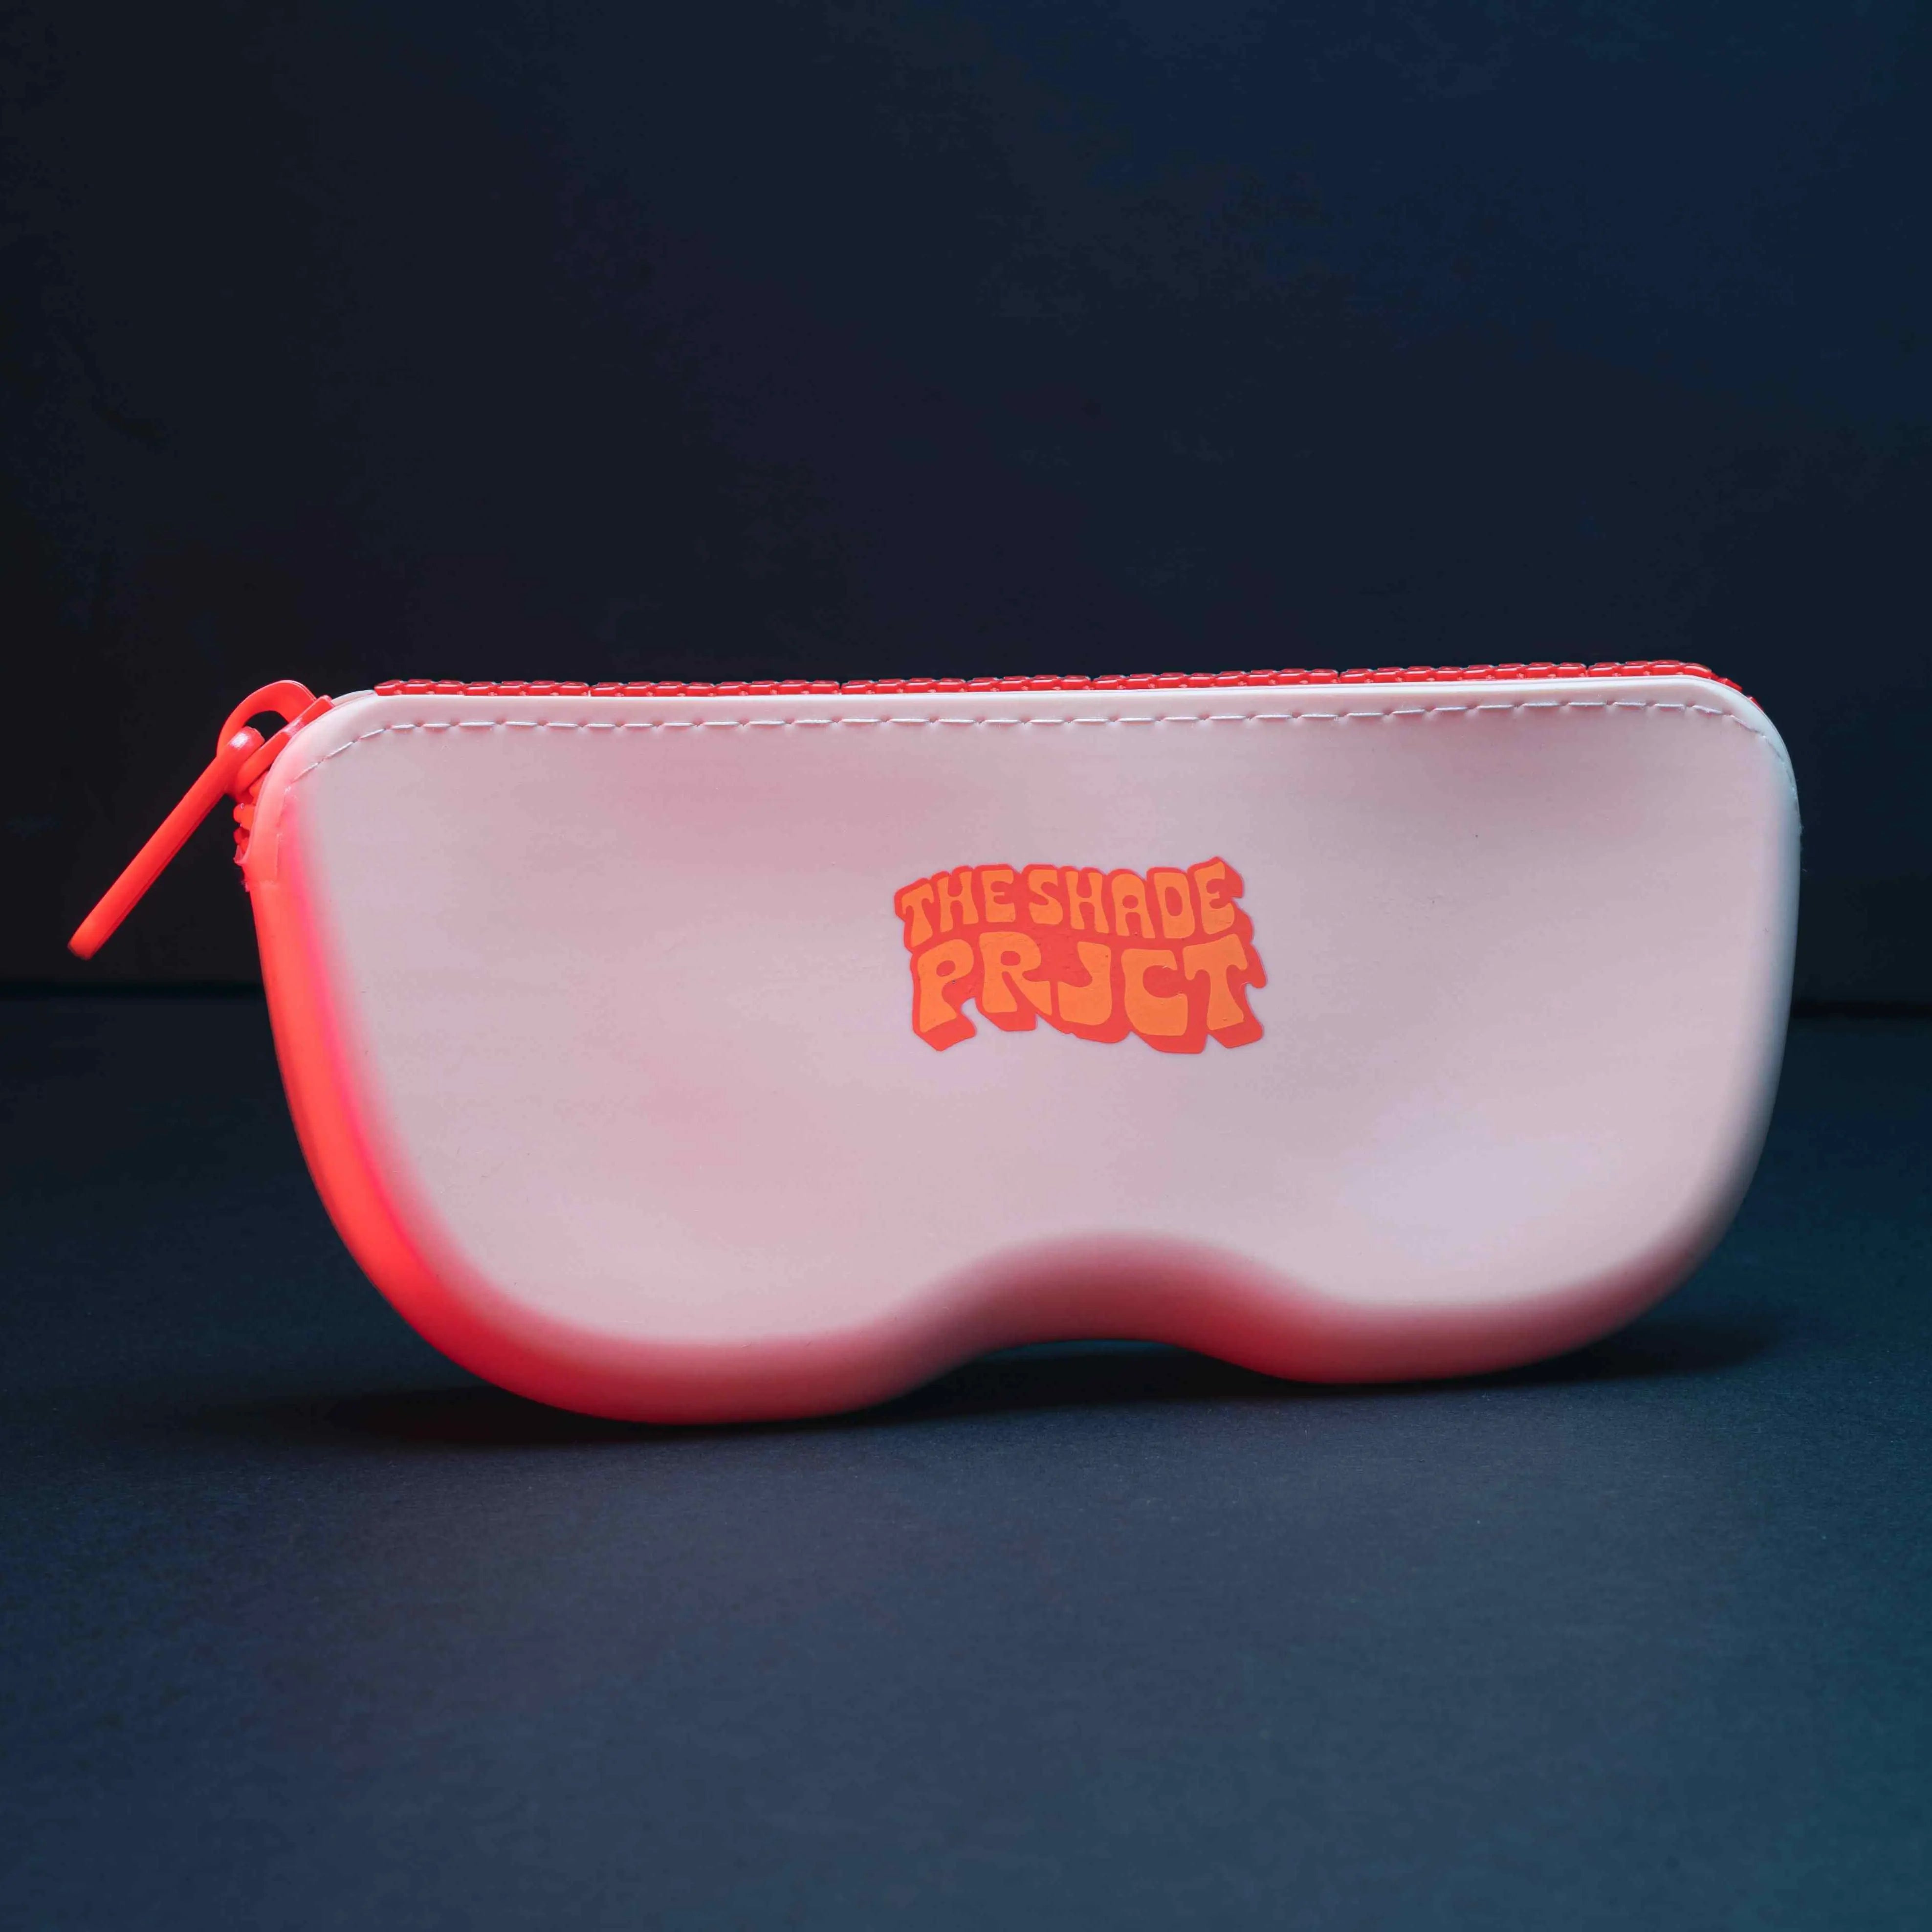 TheShadePrjct Retro Sunglasses Case Free With Every Pair Of Shades